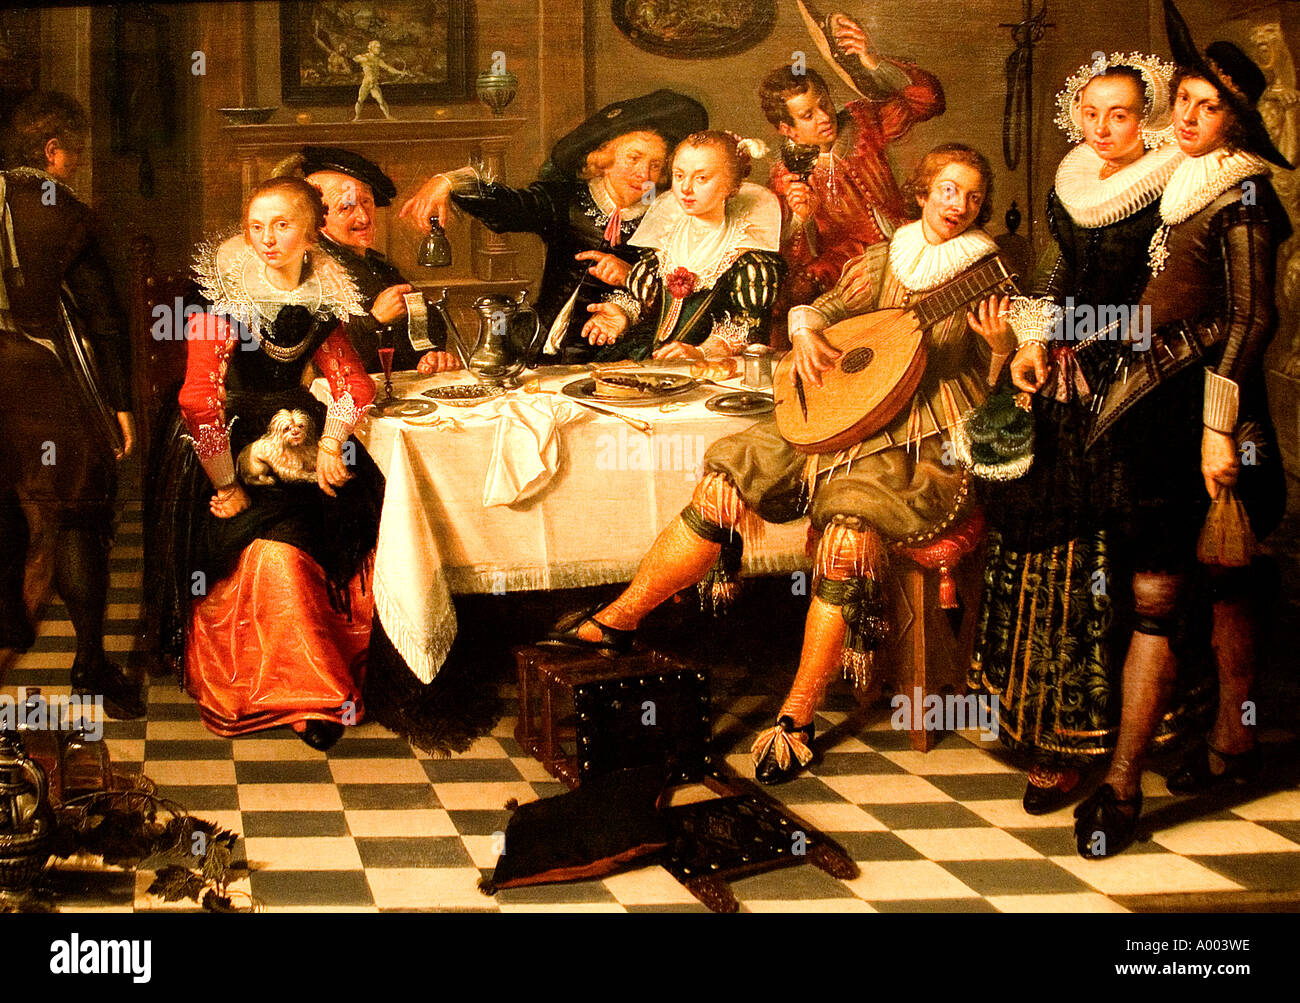 Isaac Elias A Party Food drink 1620 Netherlands Dutch Holland Stock Photo